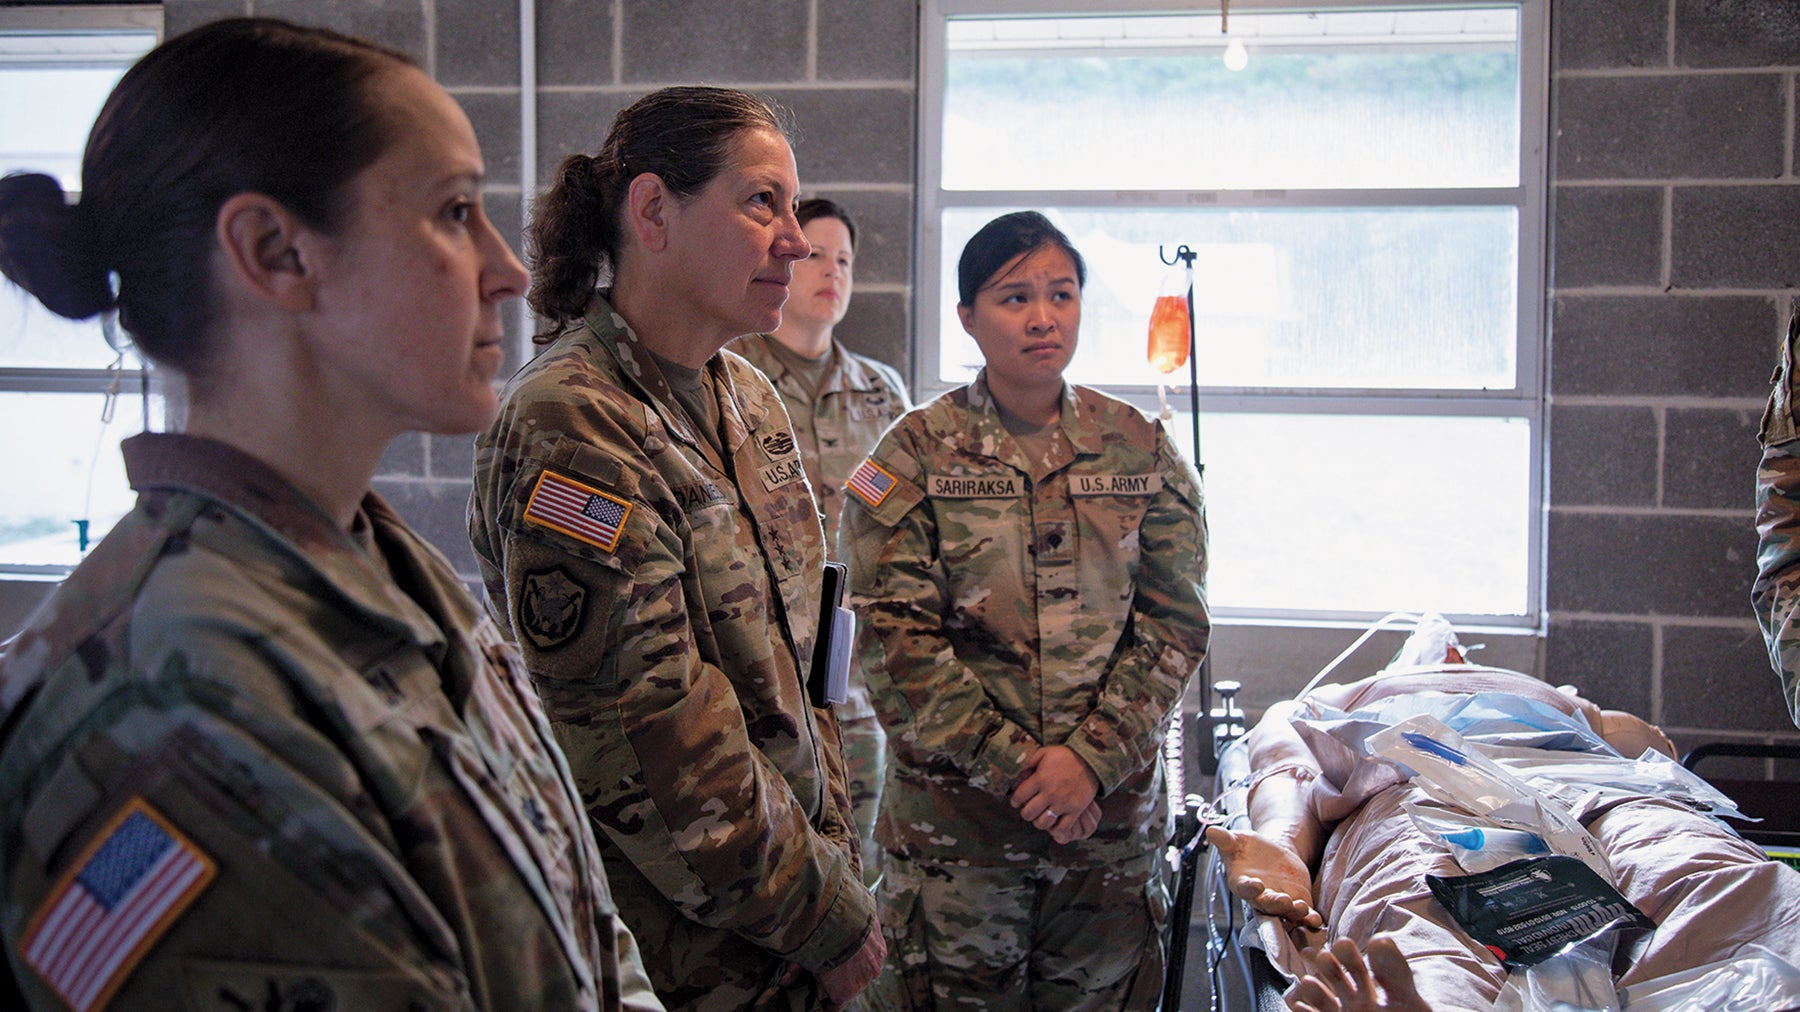 Lt. Gen. Jody Daniels, second from left, U.S. Army Reserve chief and commanding general of the U.S. Army Reserve Command, visits soldiers participating in an exercise at Camp Grayling, Michigan. (Credit: U.S. Army/Maj. Xeriqua Garfinkel)